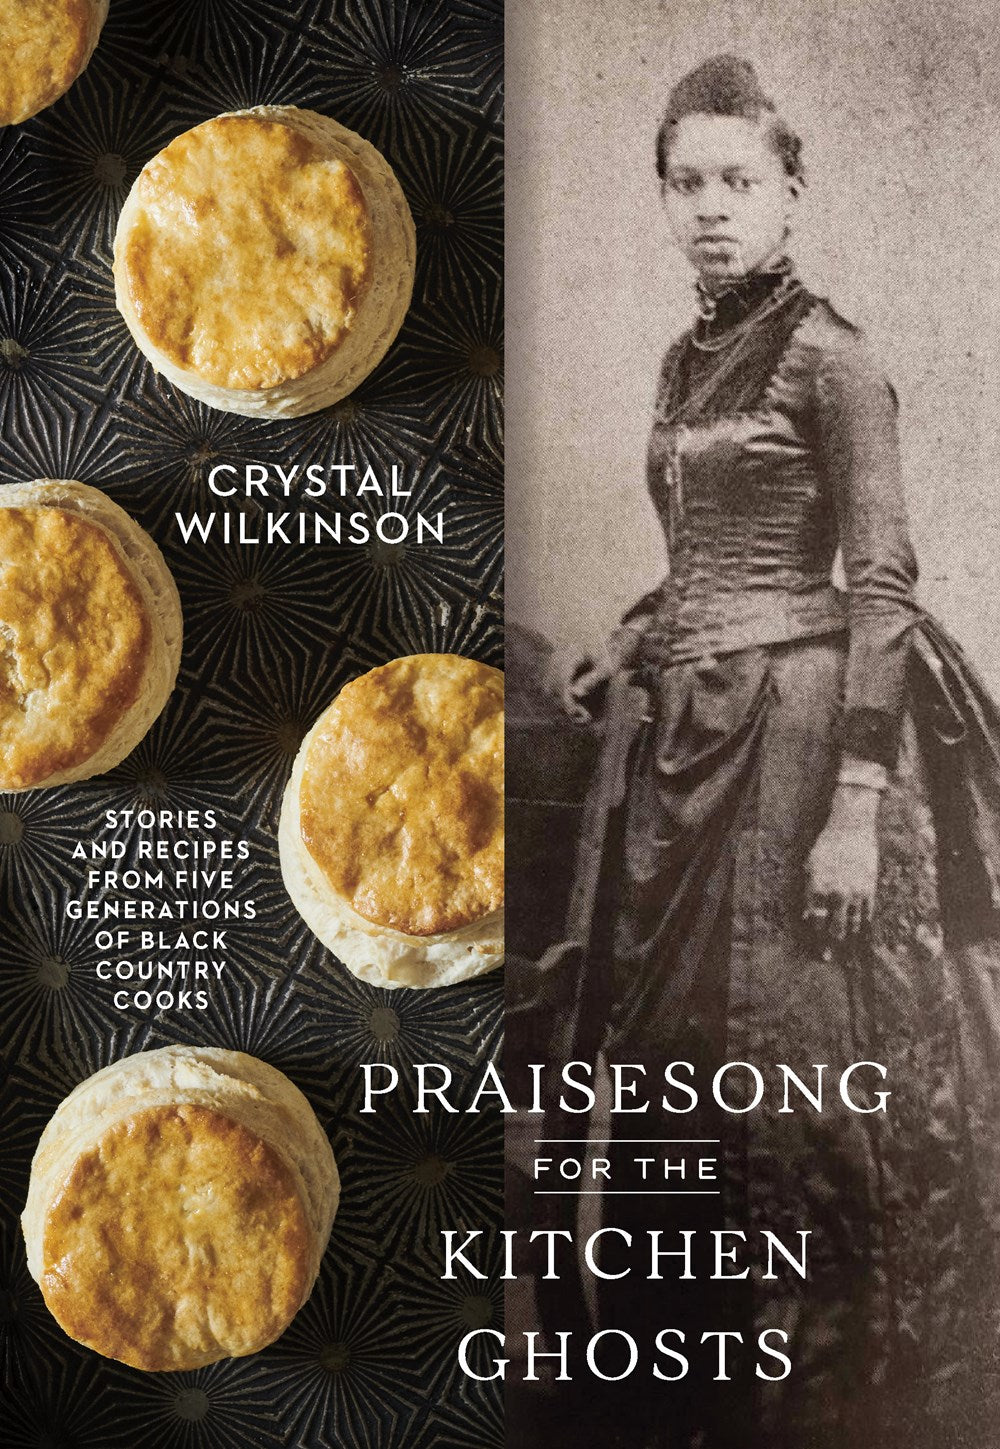 Praisesong for the Kitchen Ghosts: Stories and Recipes from Five Generations of Black Country Cooks by Crystal Wilkinson (1/23/24)